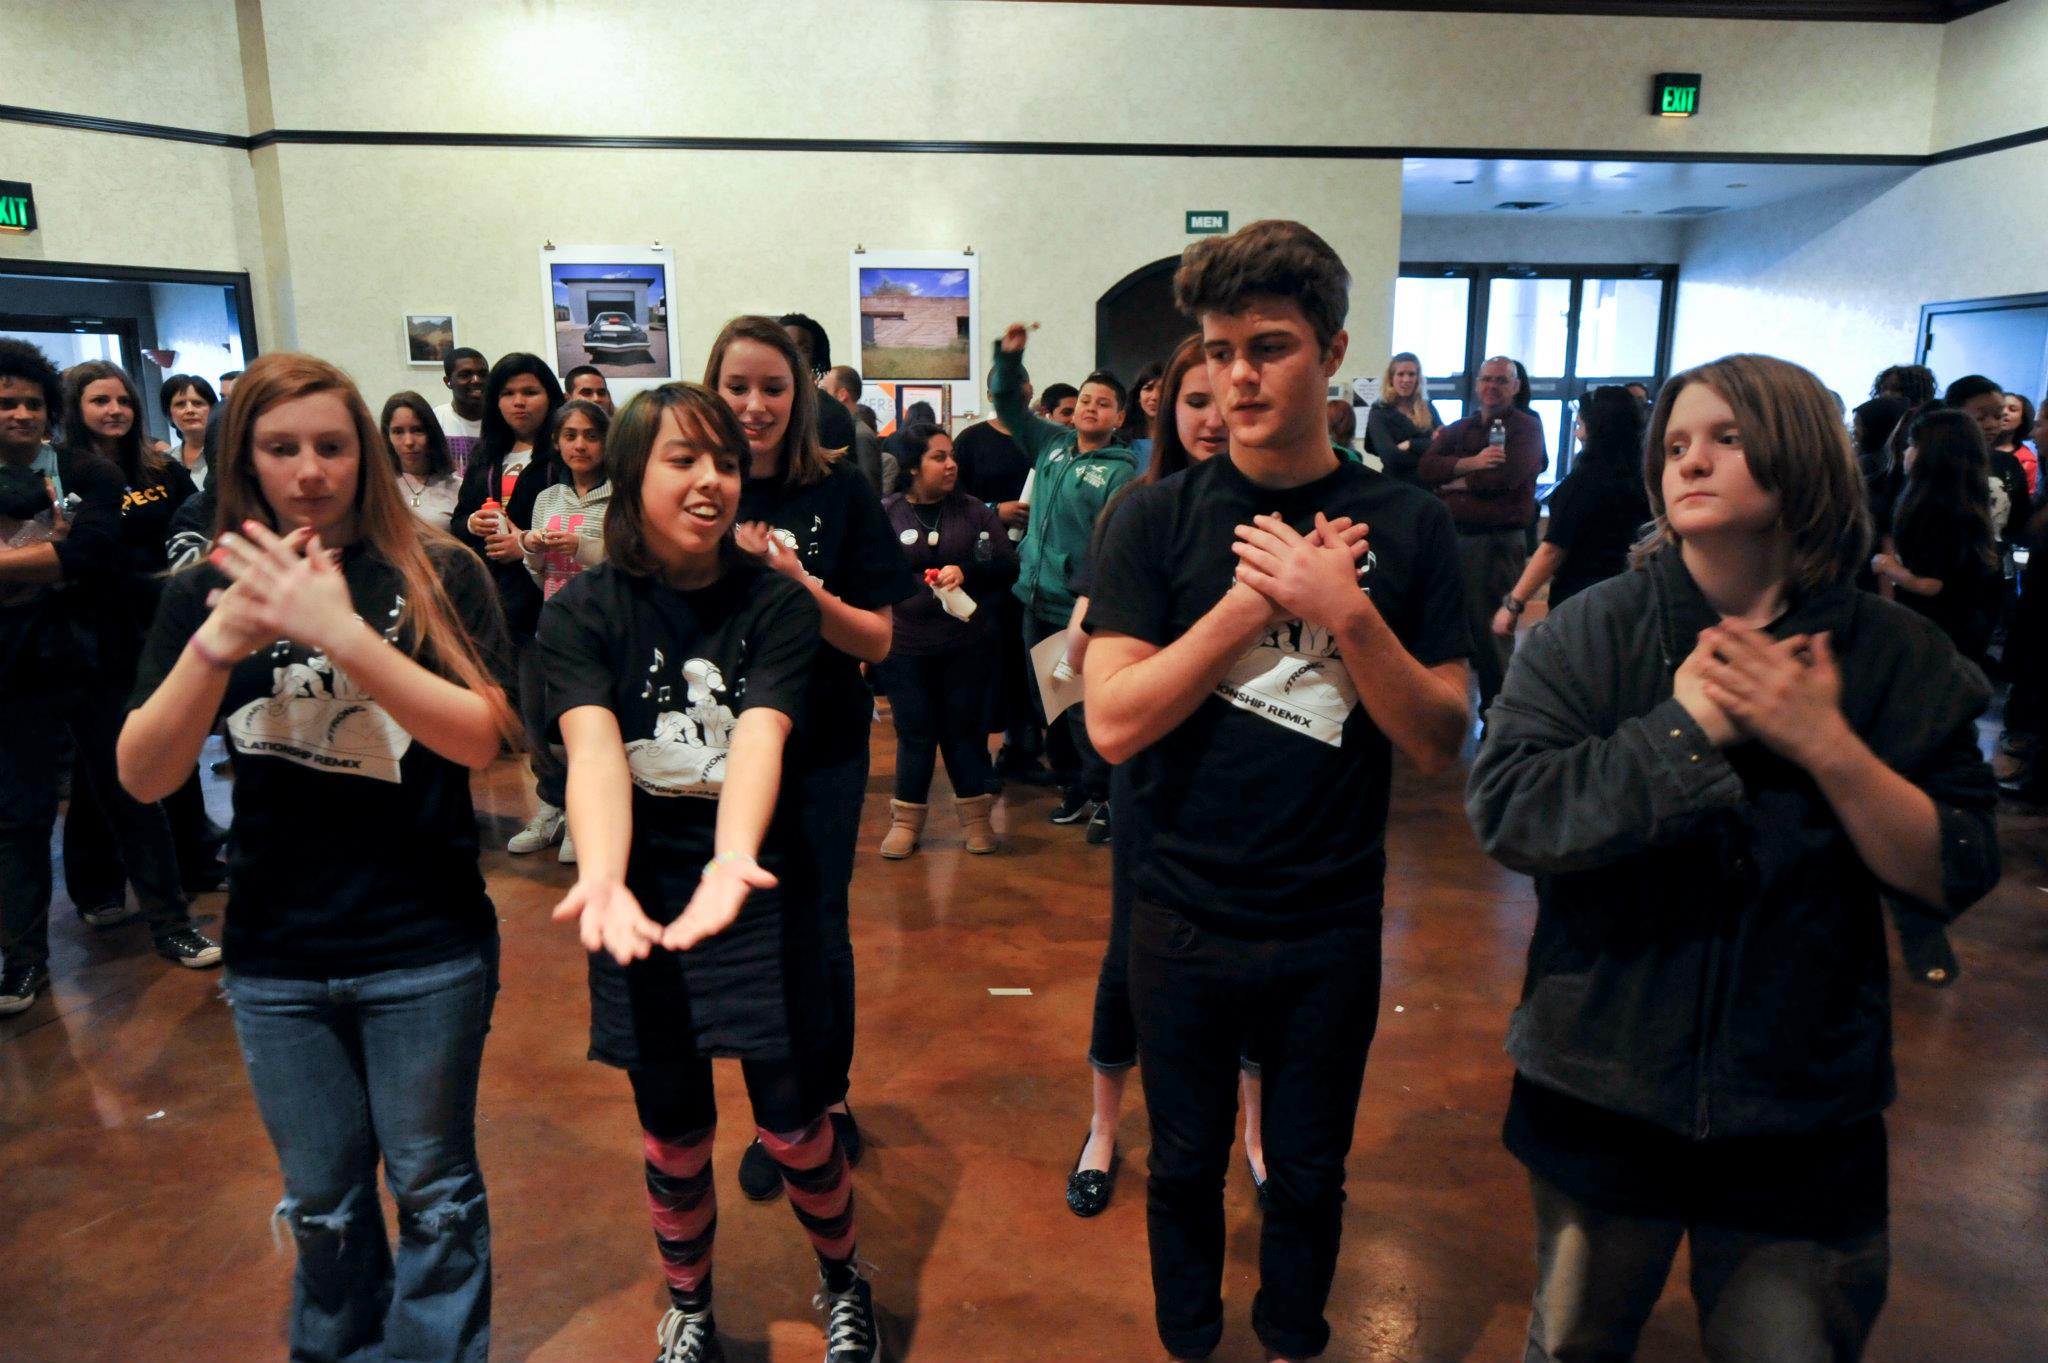 Image description: A photo of a room full of teens practicing a dance routine.